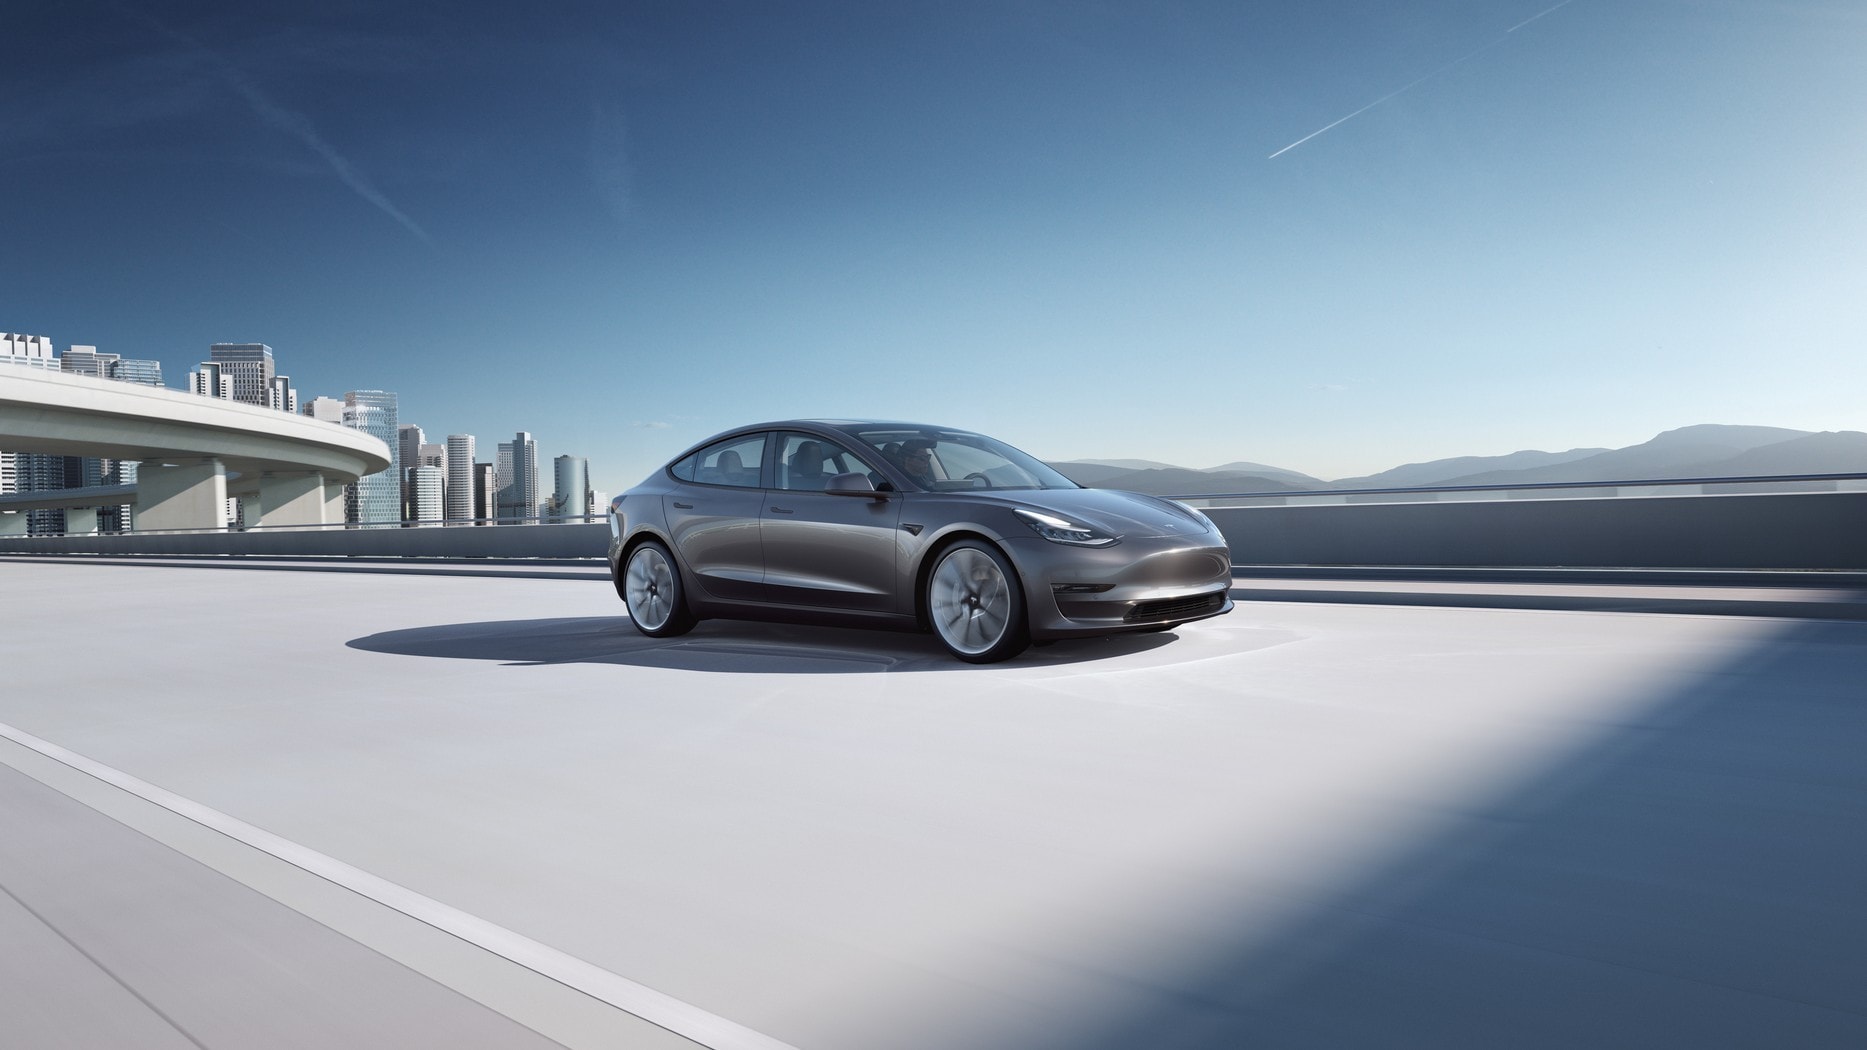 https://s1.cdn.autoevolution.com/images/news/tesla-is-reportedly-working-on-a-model-3-revamp-to-make-it-even-cheaper-to-make-205029_1.jpg